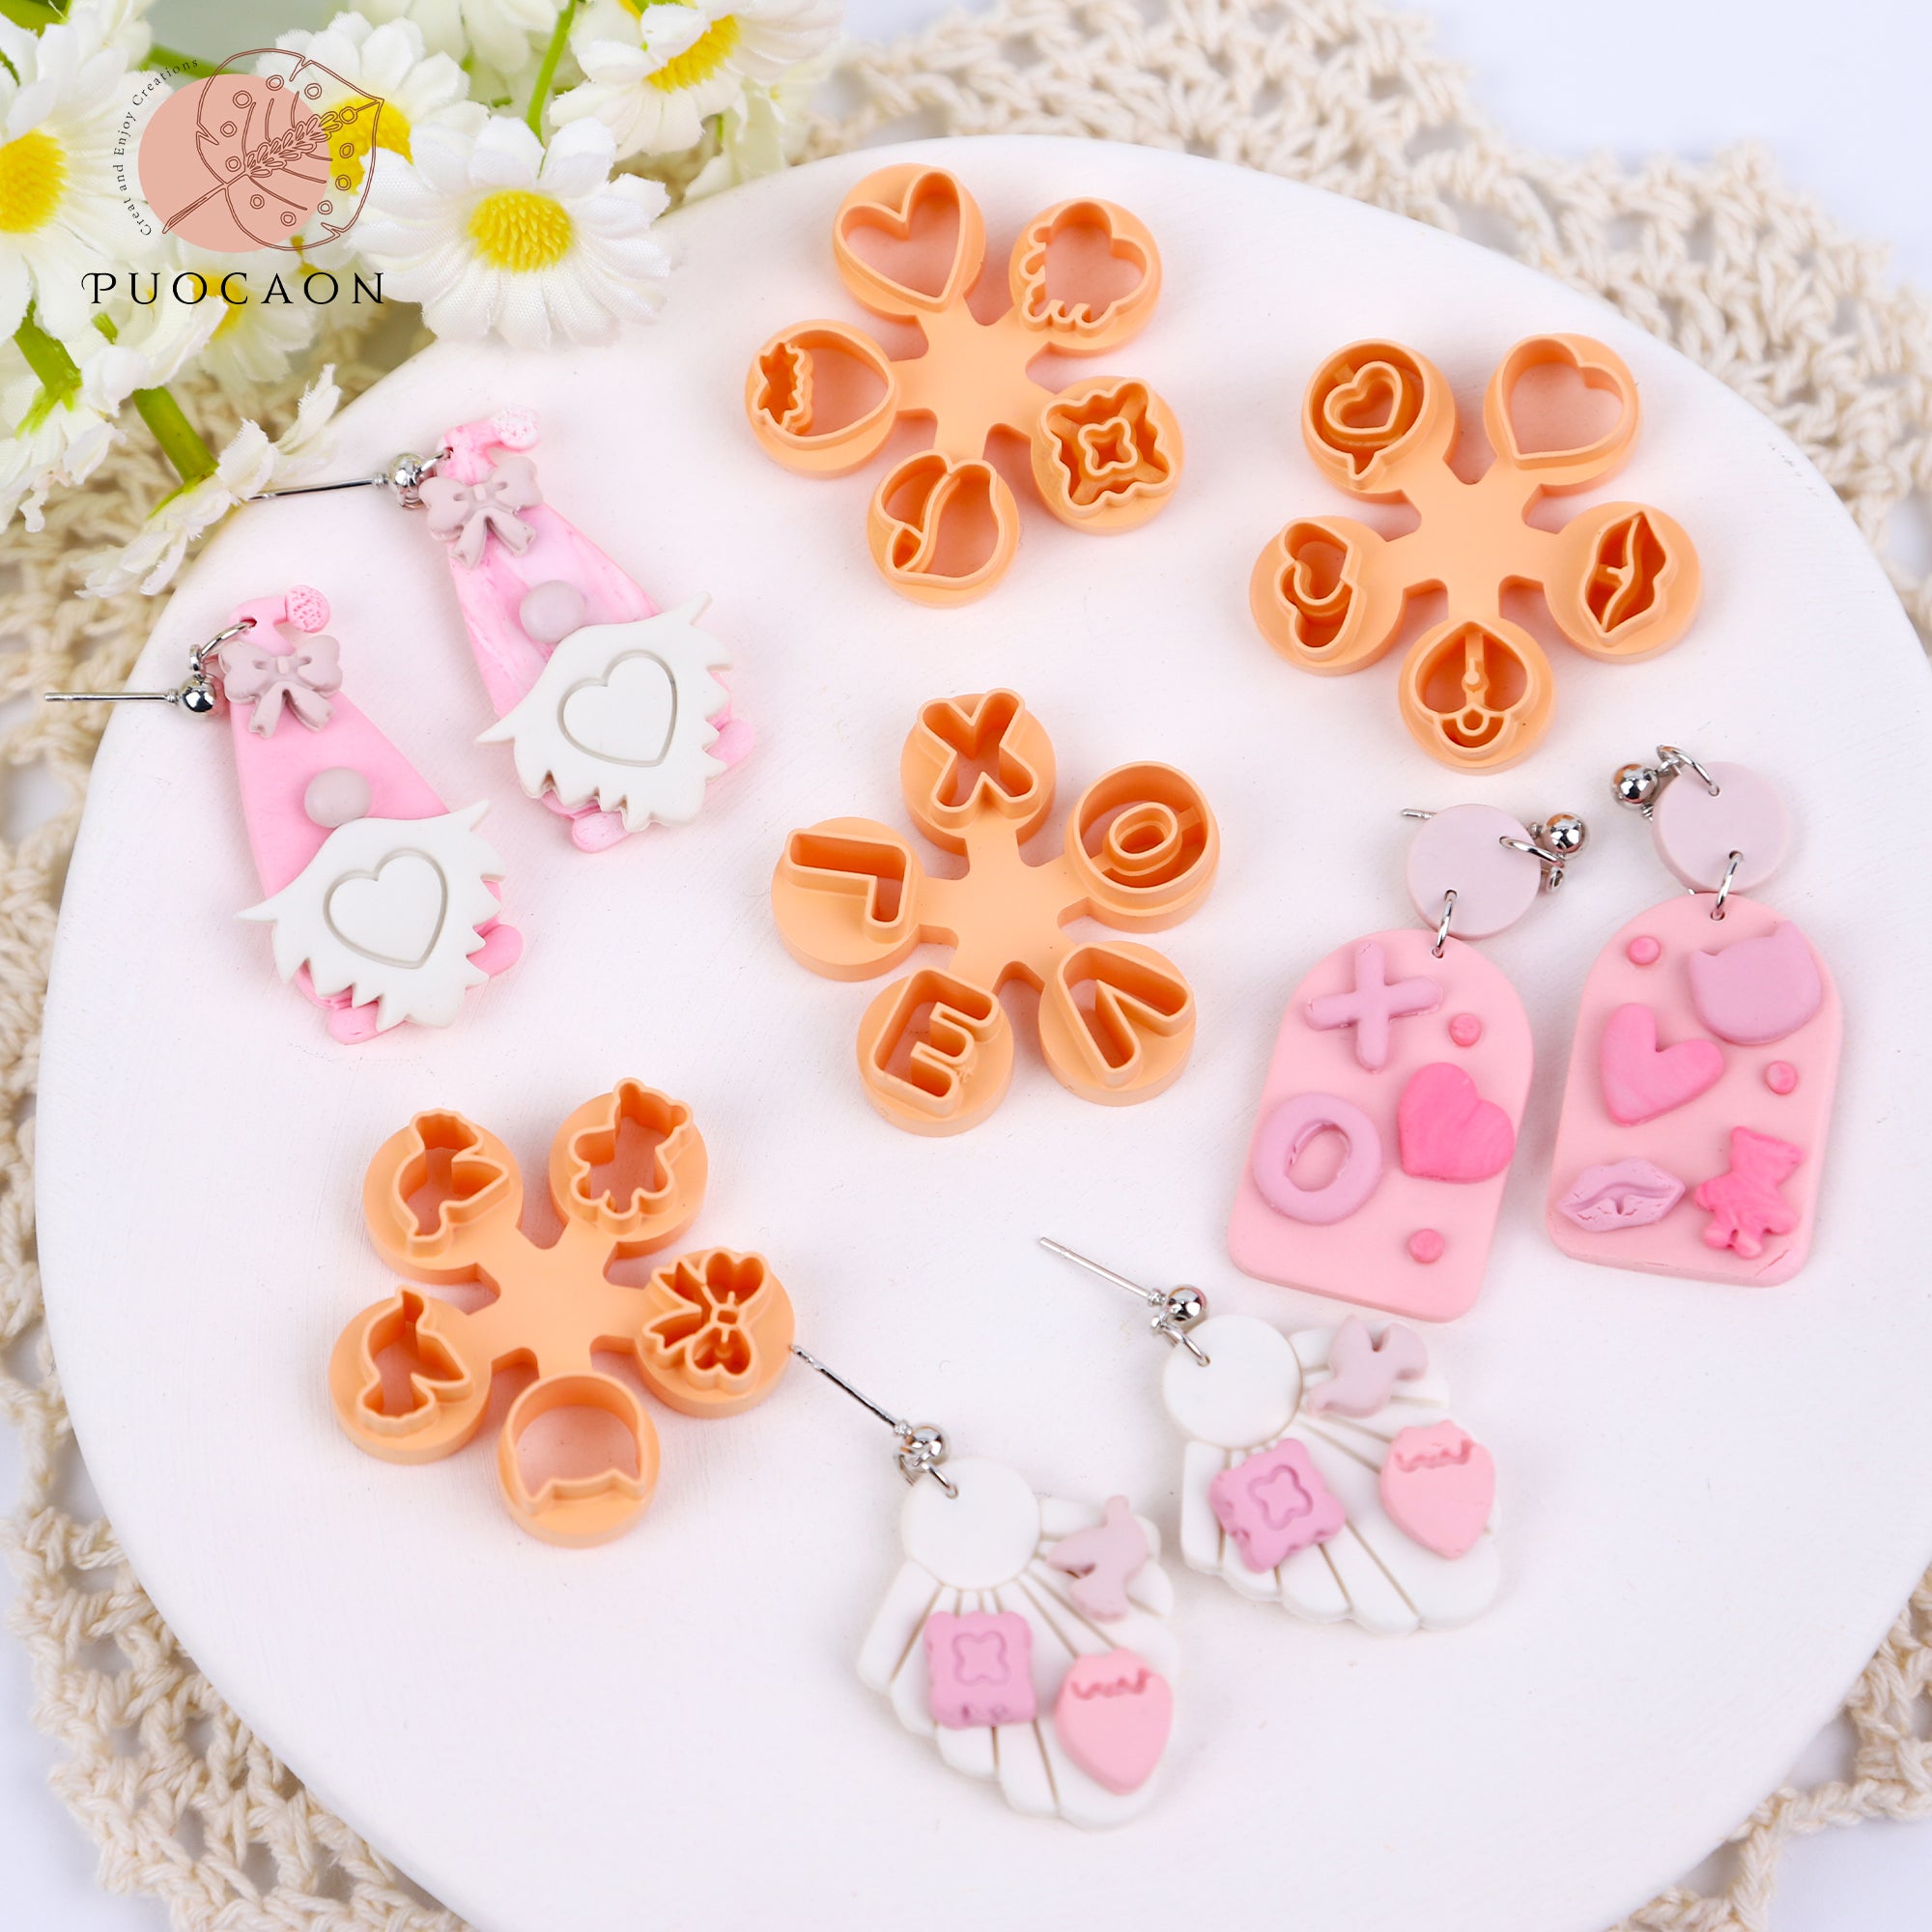  Puocaon Valentines Polymer Clay Cutters - 9 Pcs Clay Cutters  For Polymer Clay Jewelry Making